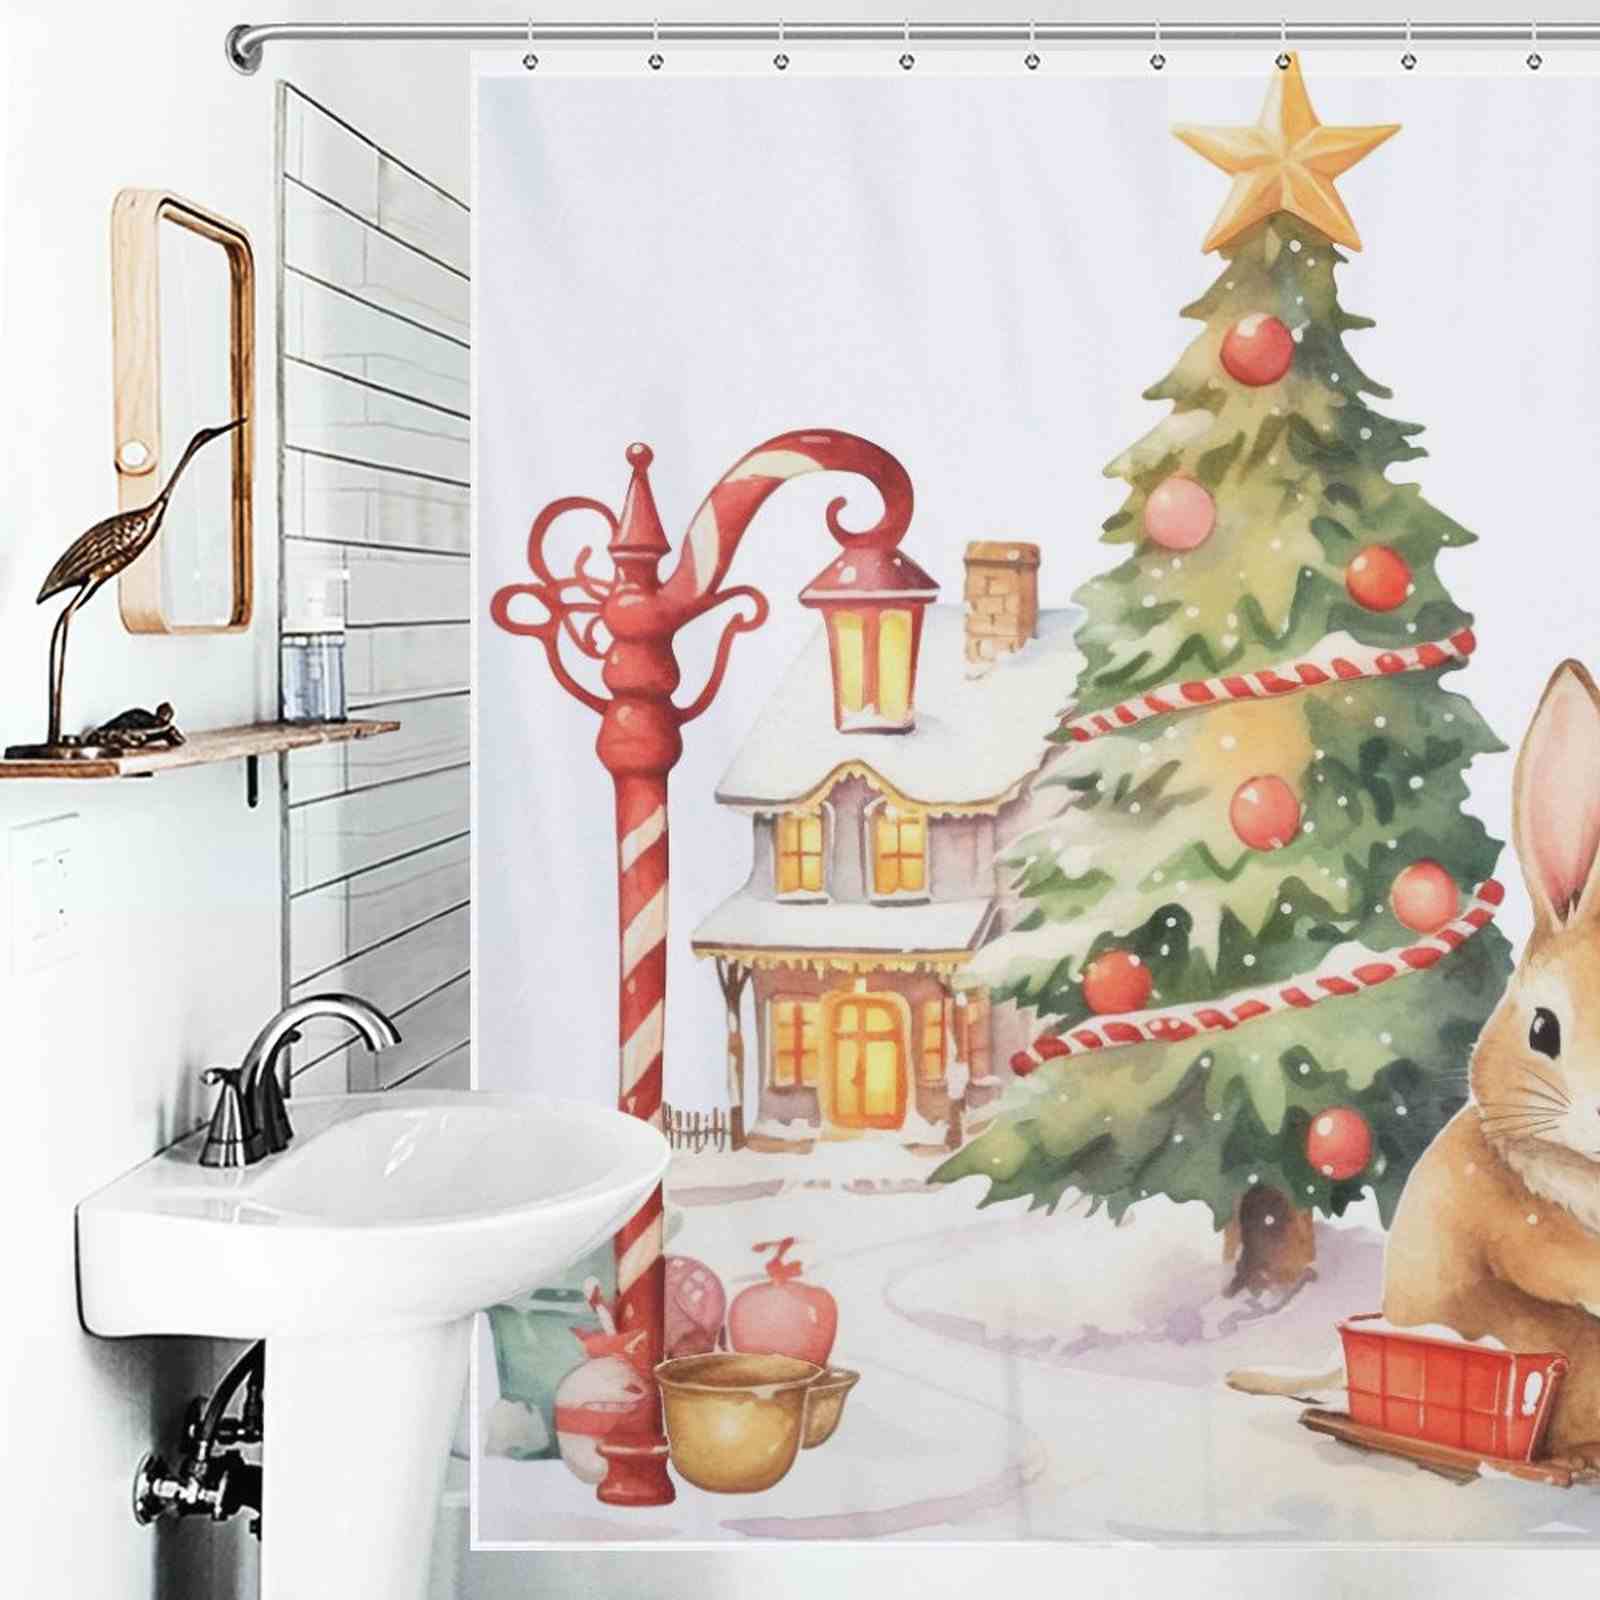 Spruce up your bathroom decor this Christmas season with a Cotton Cat Cute Rabbit Tree Christmas Shower Curtain showcasing an adorable bunny and a beautifully decorated Christmas tree.